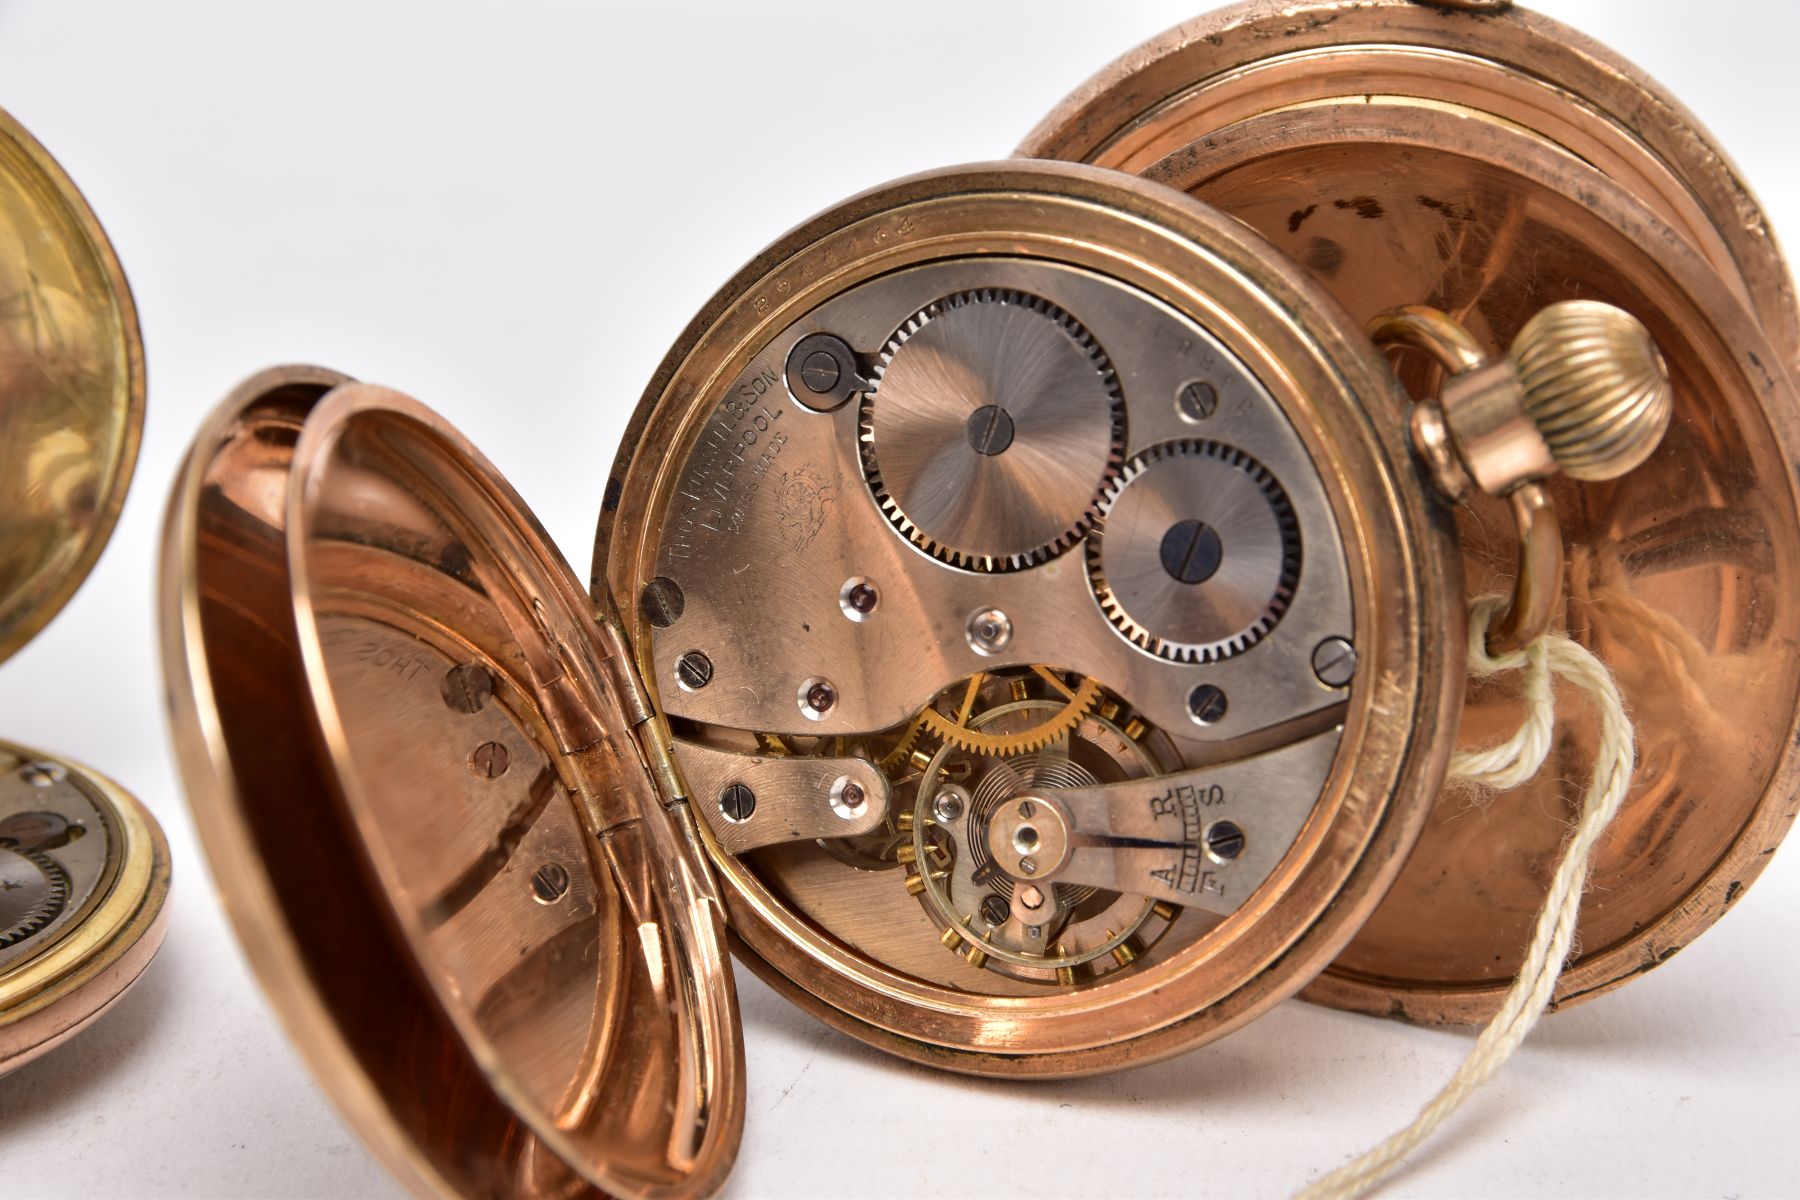 THREE GOLD PLATED OPEN FACED POCKET WATCHES, the first with a white dial signed 'Eros', Arabic - Image 6 of 8